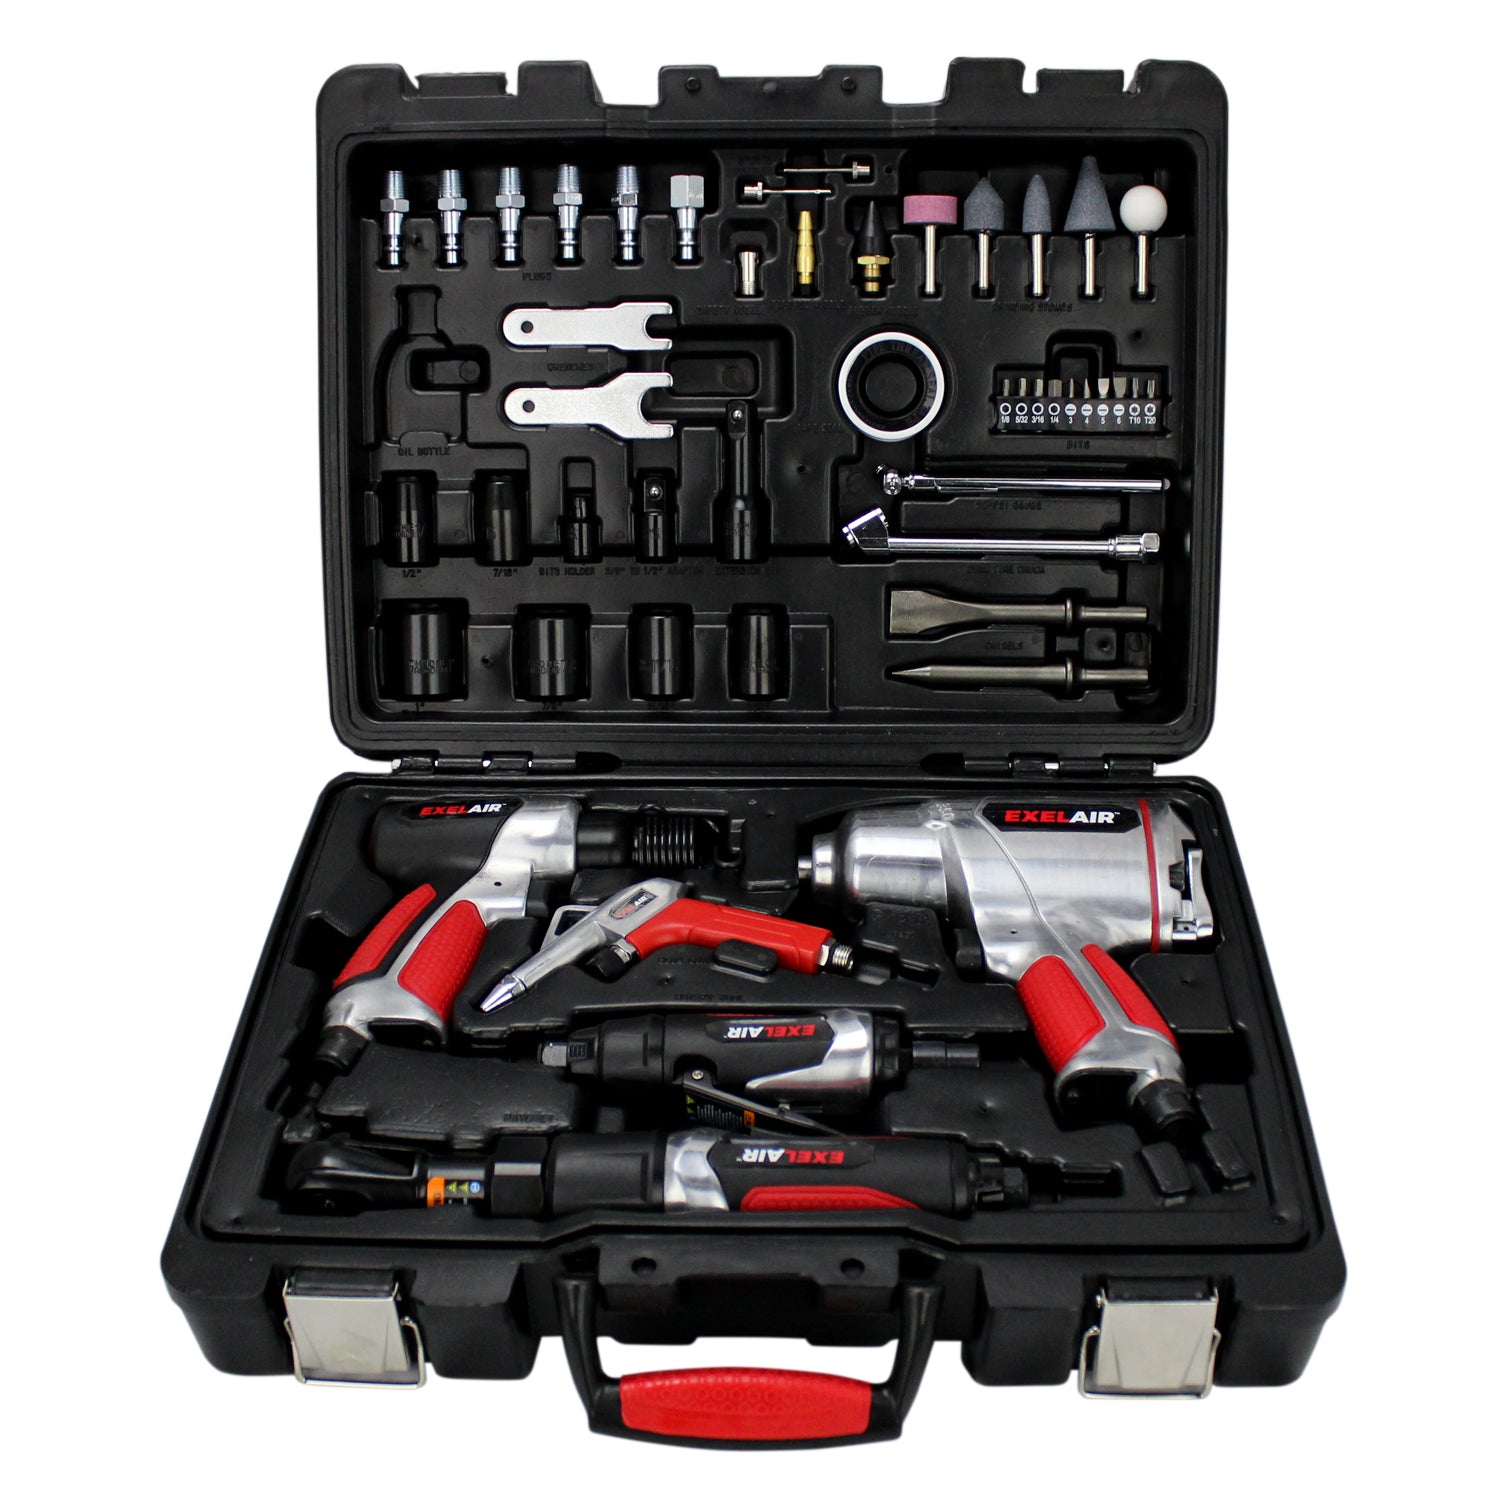 EXELAIR® Pro Air Tool Kit, 50-Piece, Ultimate Air Compressor Accessories